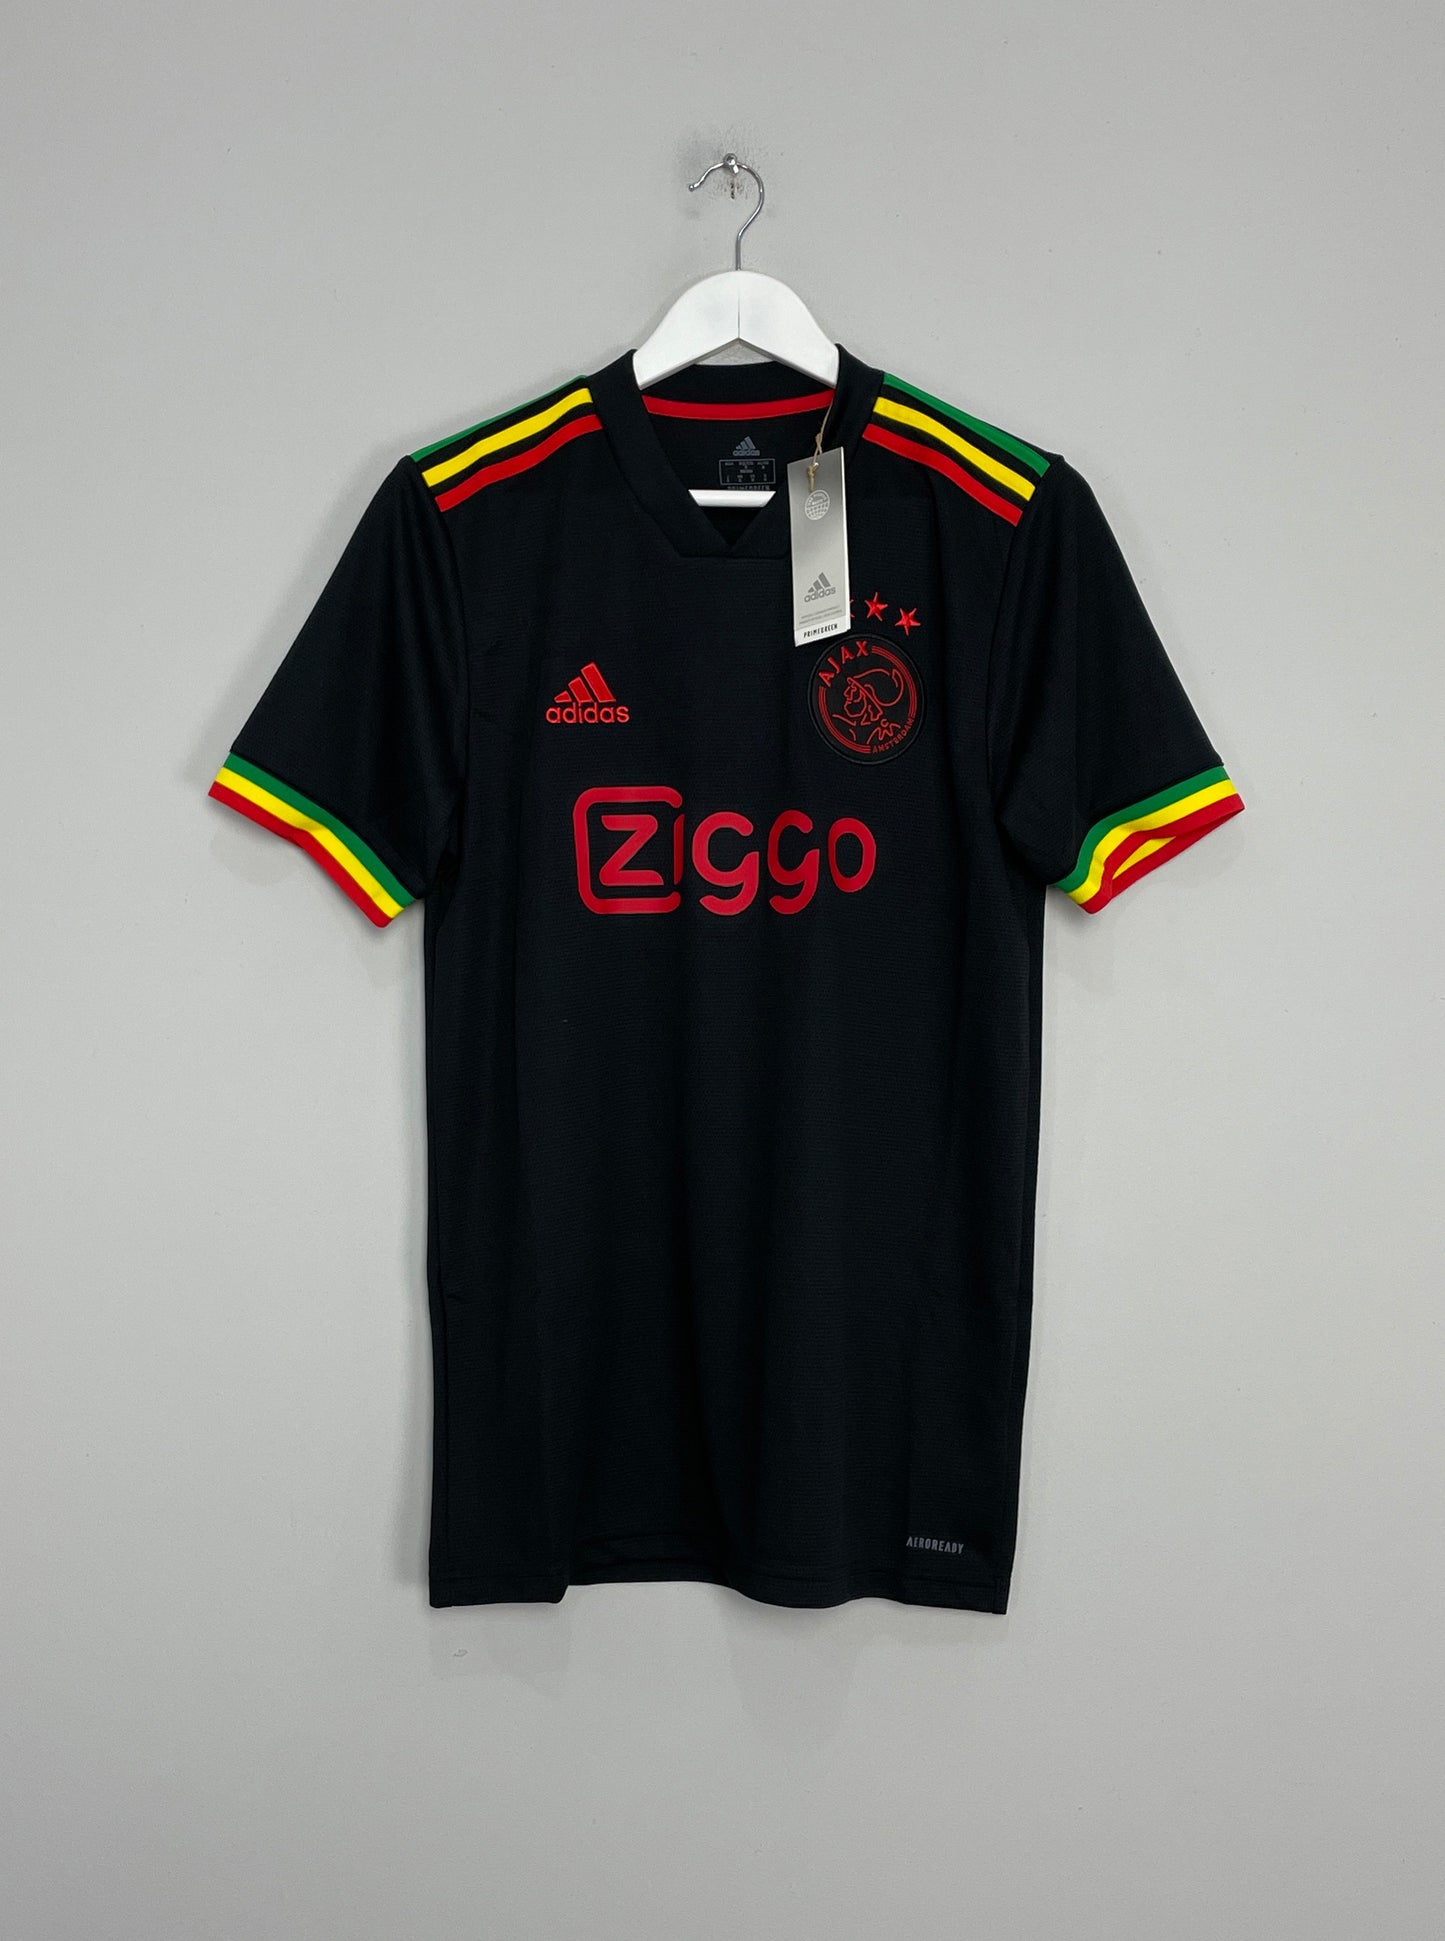 Image of the Ajax shirt from the 2021/22 season